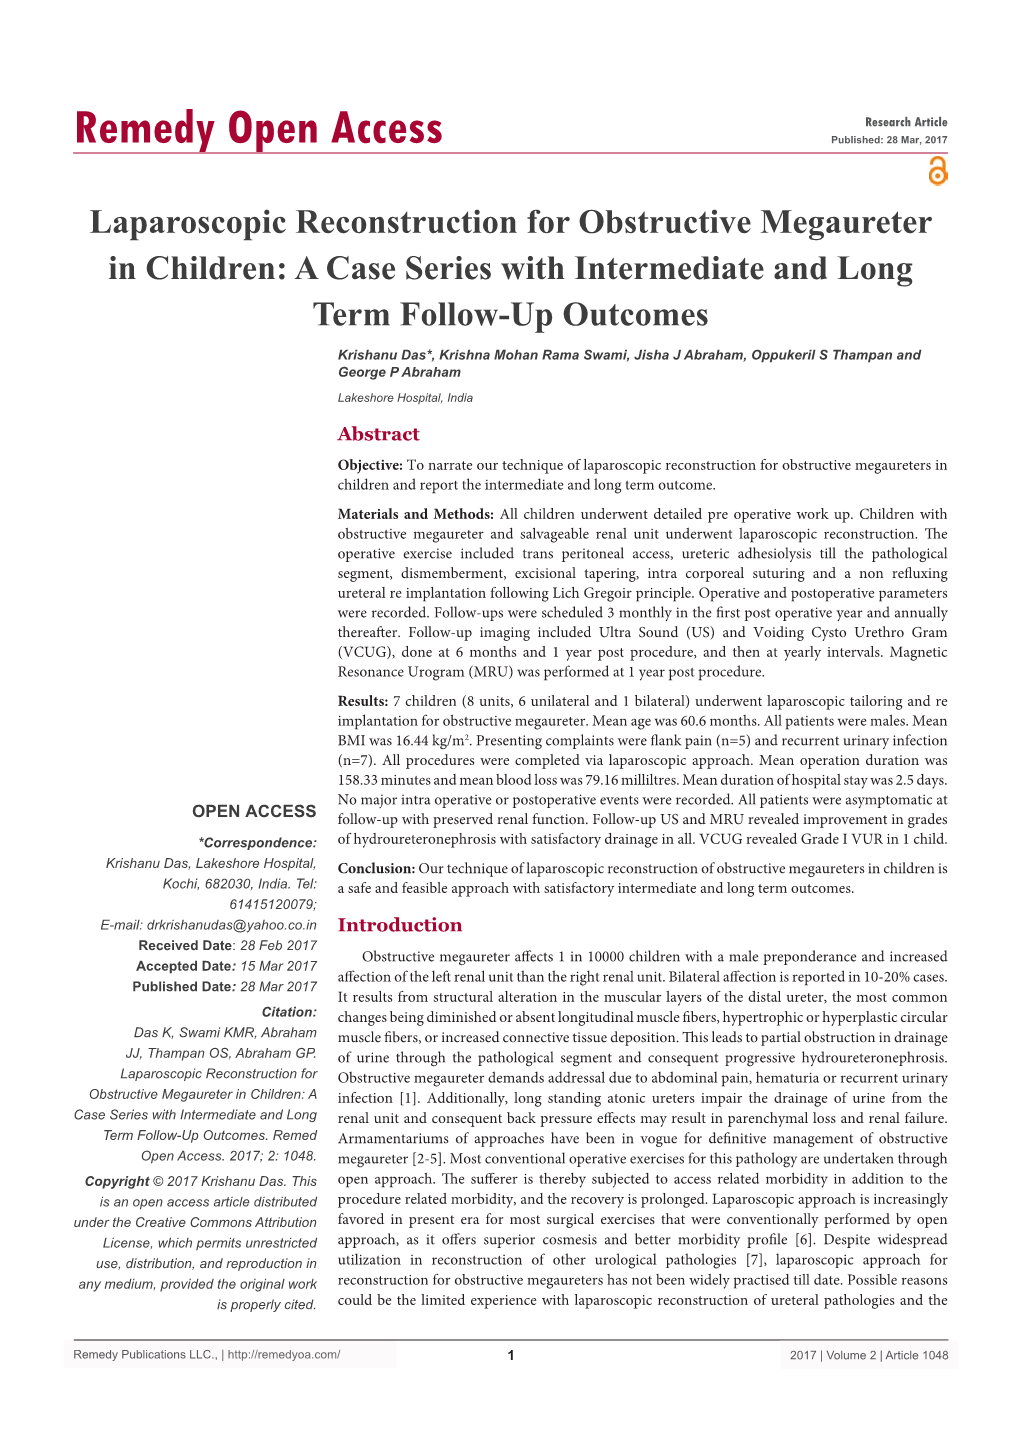 Laparoscopic Reconstruction for Obstructive Megaureter in Children: a Case Series with Intermediate and Long Term Follow-Up Outcomes